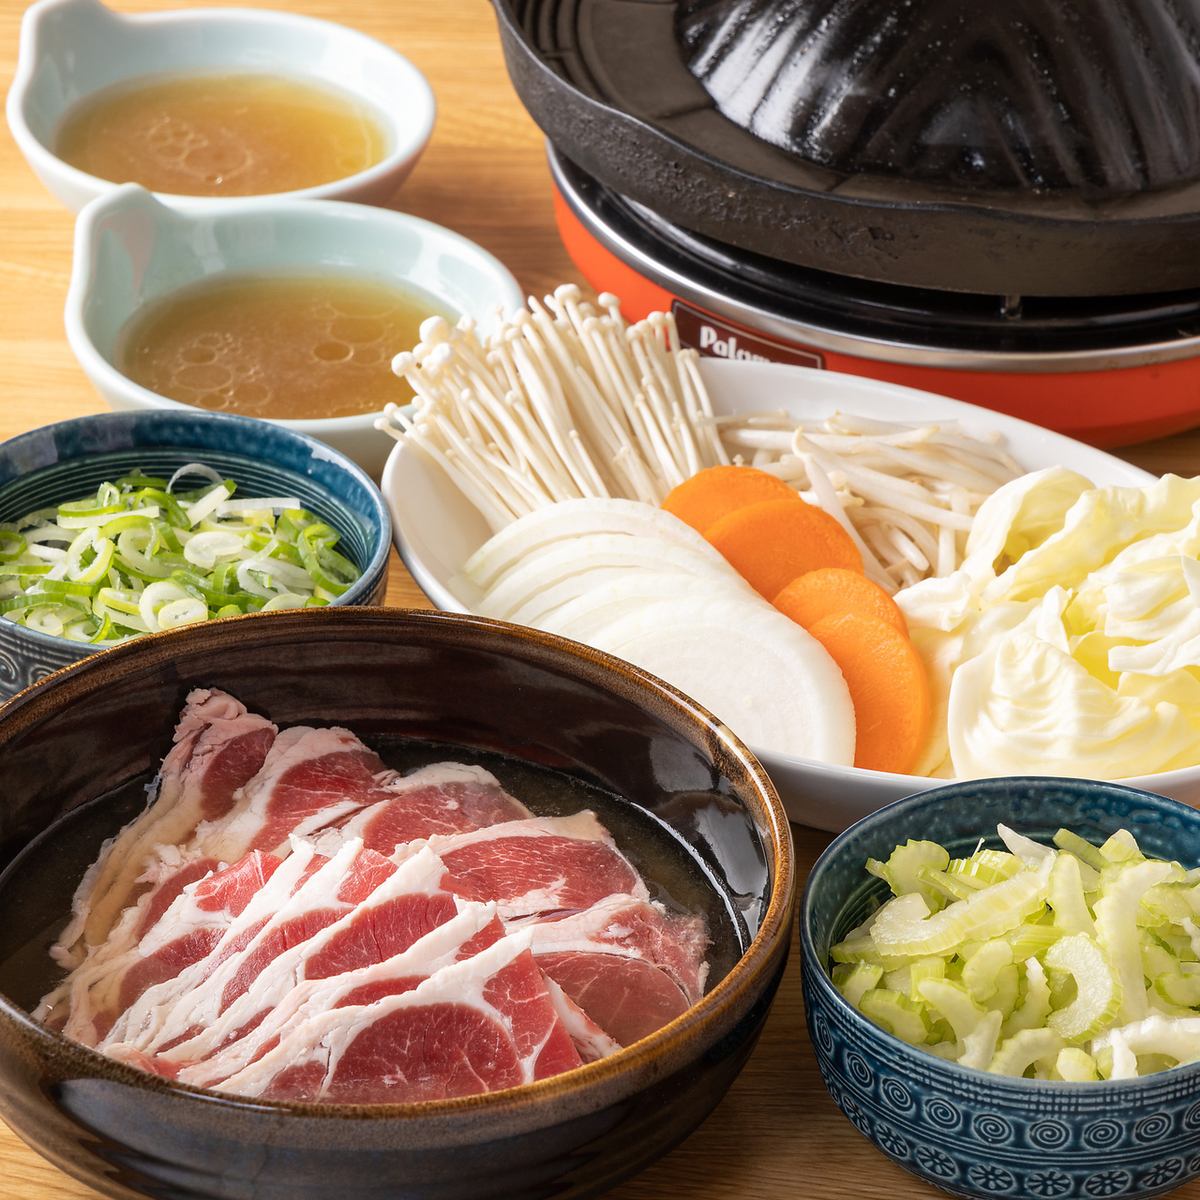 Genghis Khan full of nutrition is highly recommended for those who want healthy yakiniku!